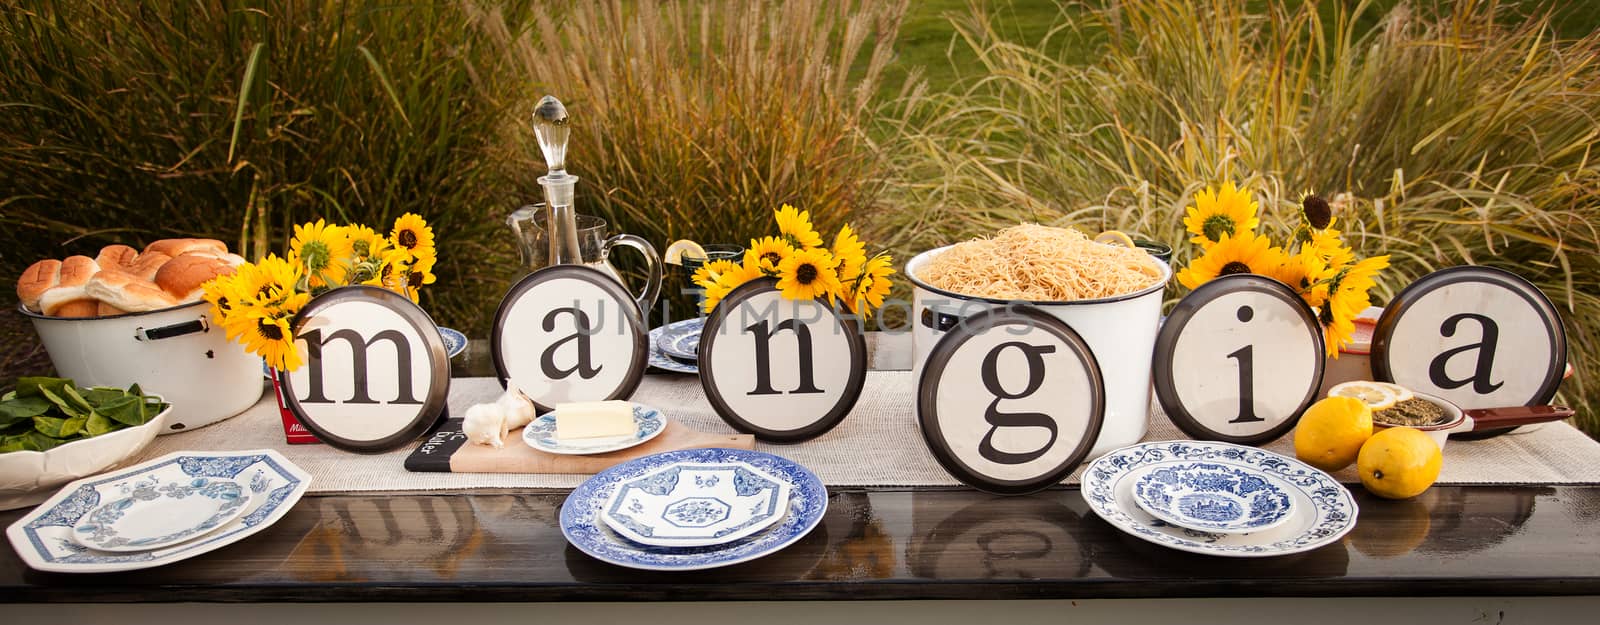 Beautiful rustic table setting with plate letters spelling out the Italian Word "Mangia."